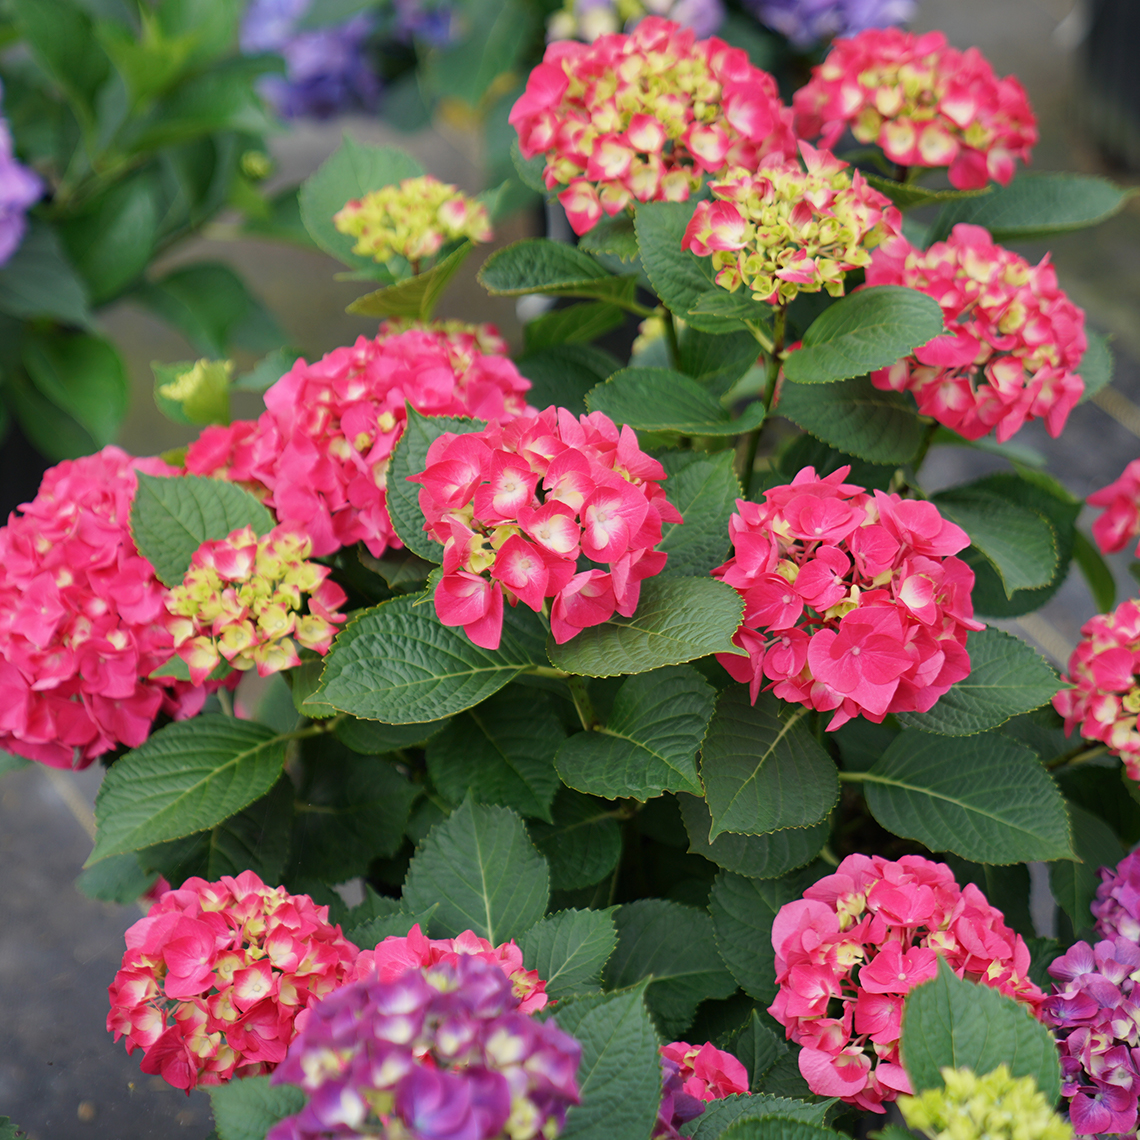 Wee Bit Giddy hydrangea macrophylla blooming a saturated pink color